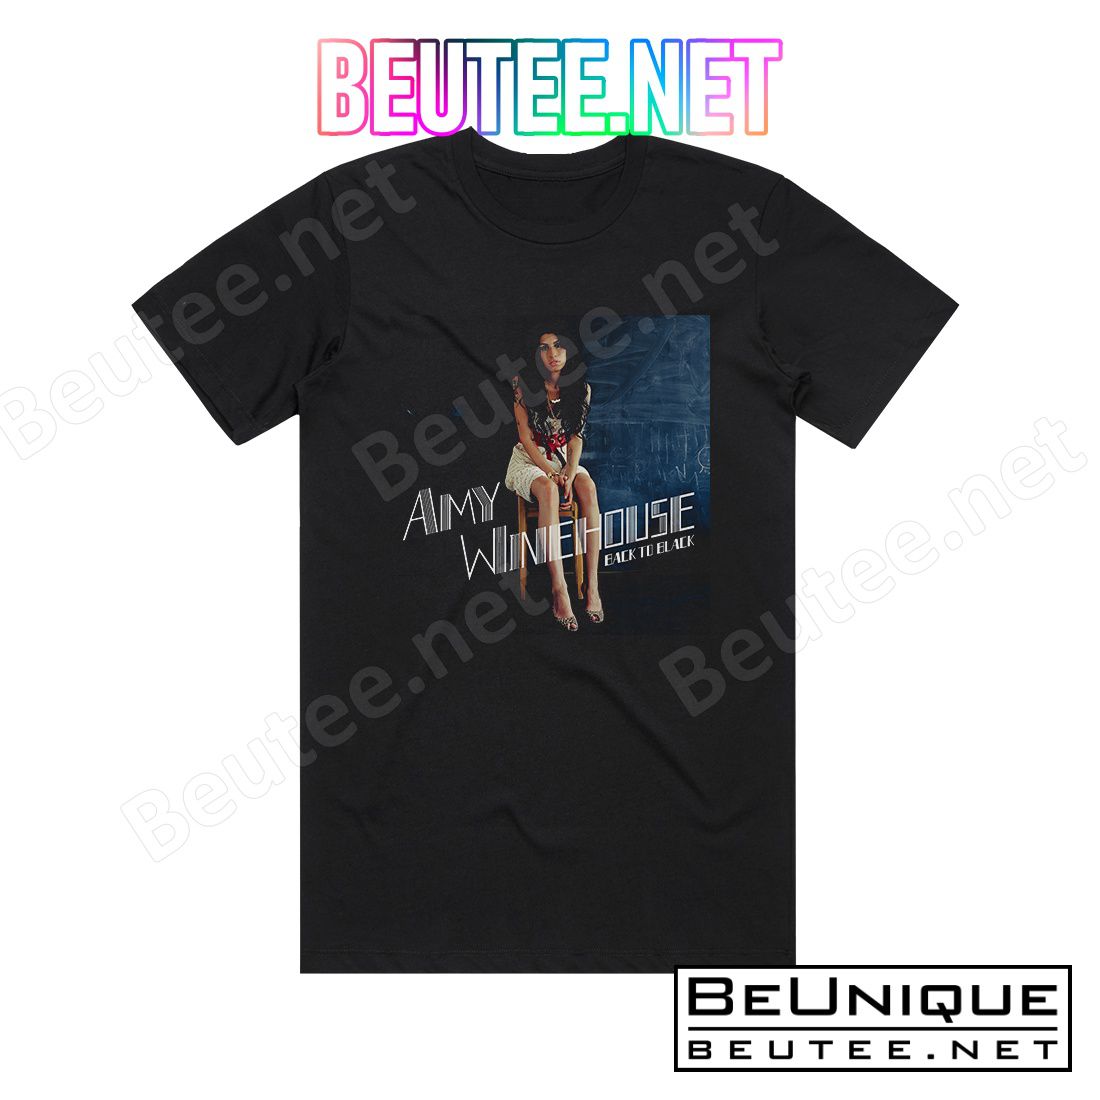 Amy Winehouse Back To 2 Album Cover T-Shirt